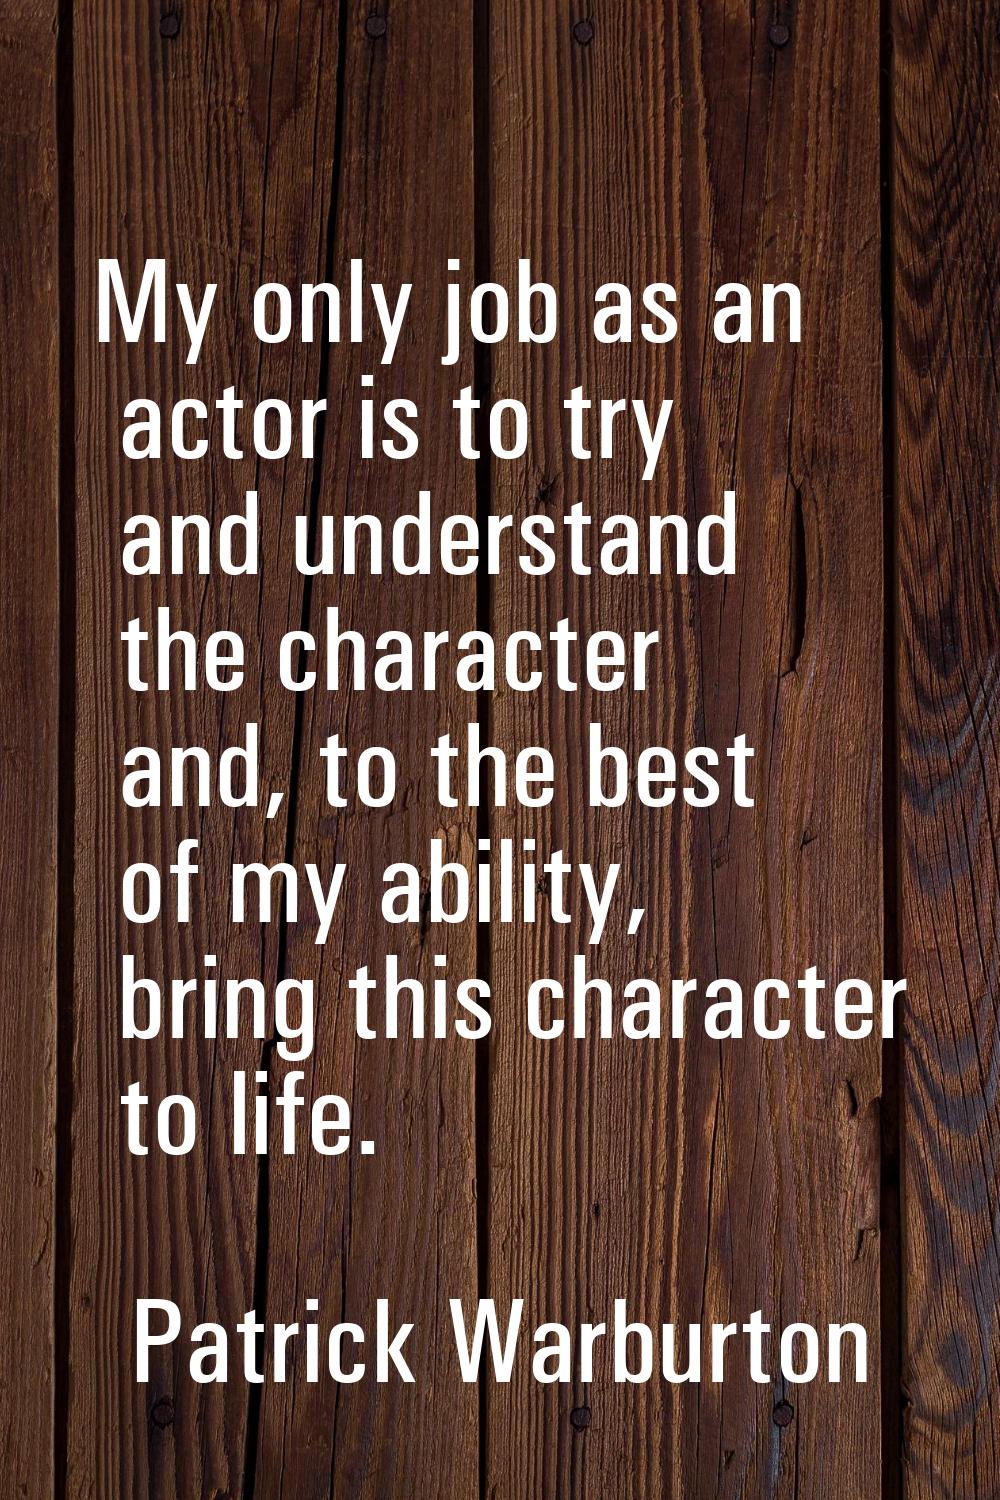 My only job as an actor is to try and understand the character and, to the best of my ability, brin